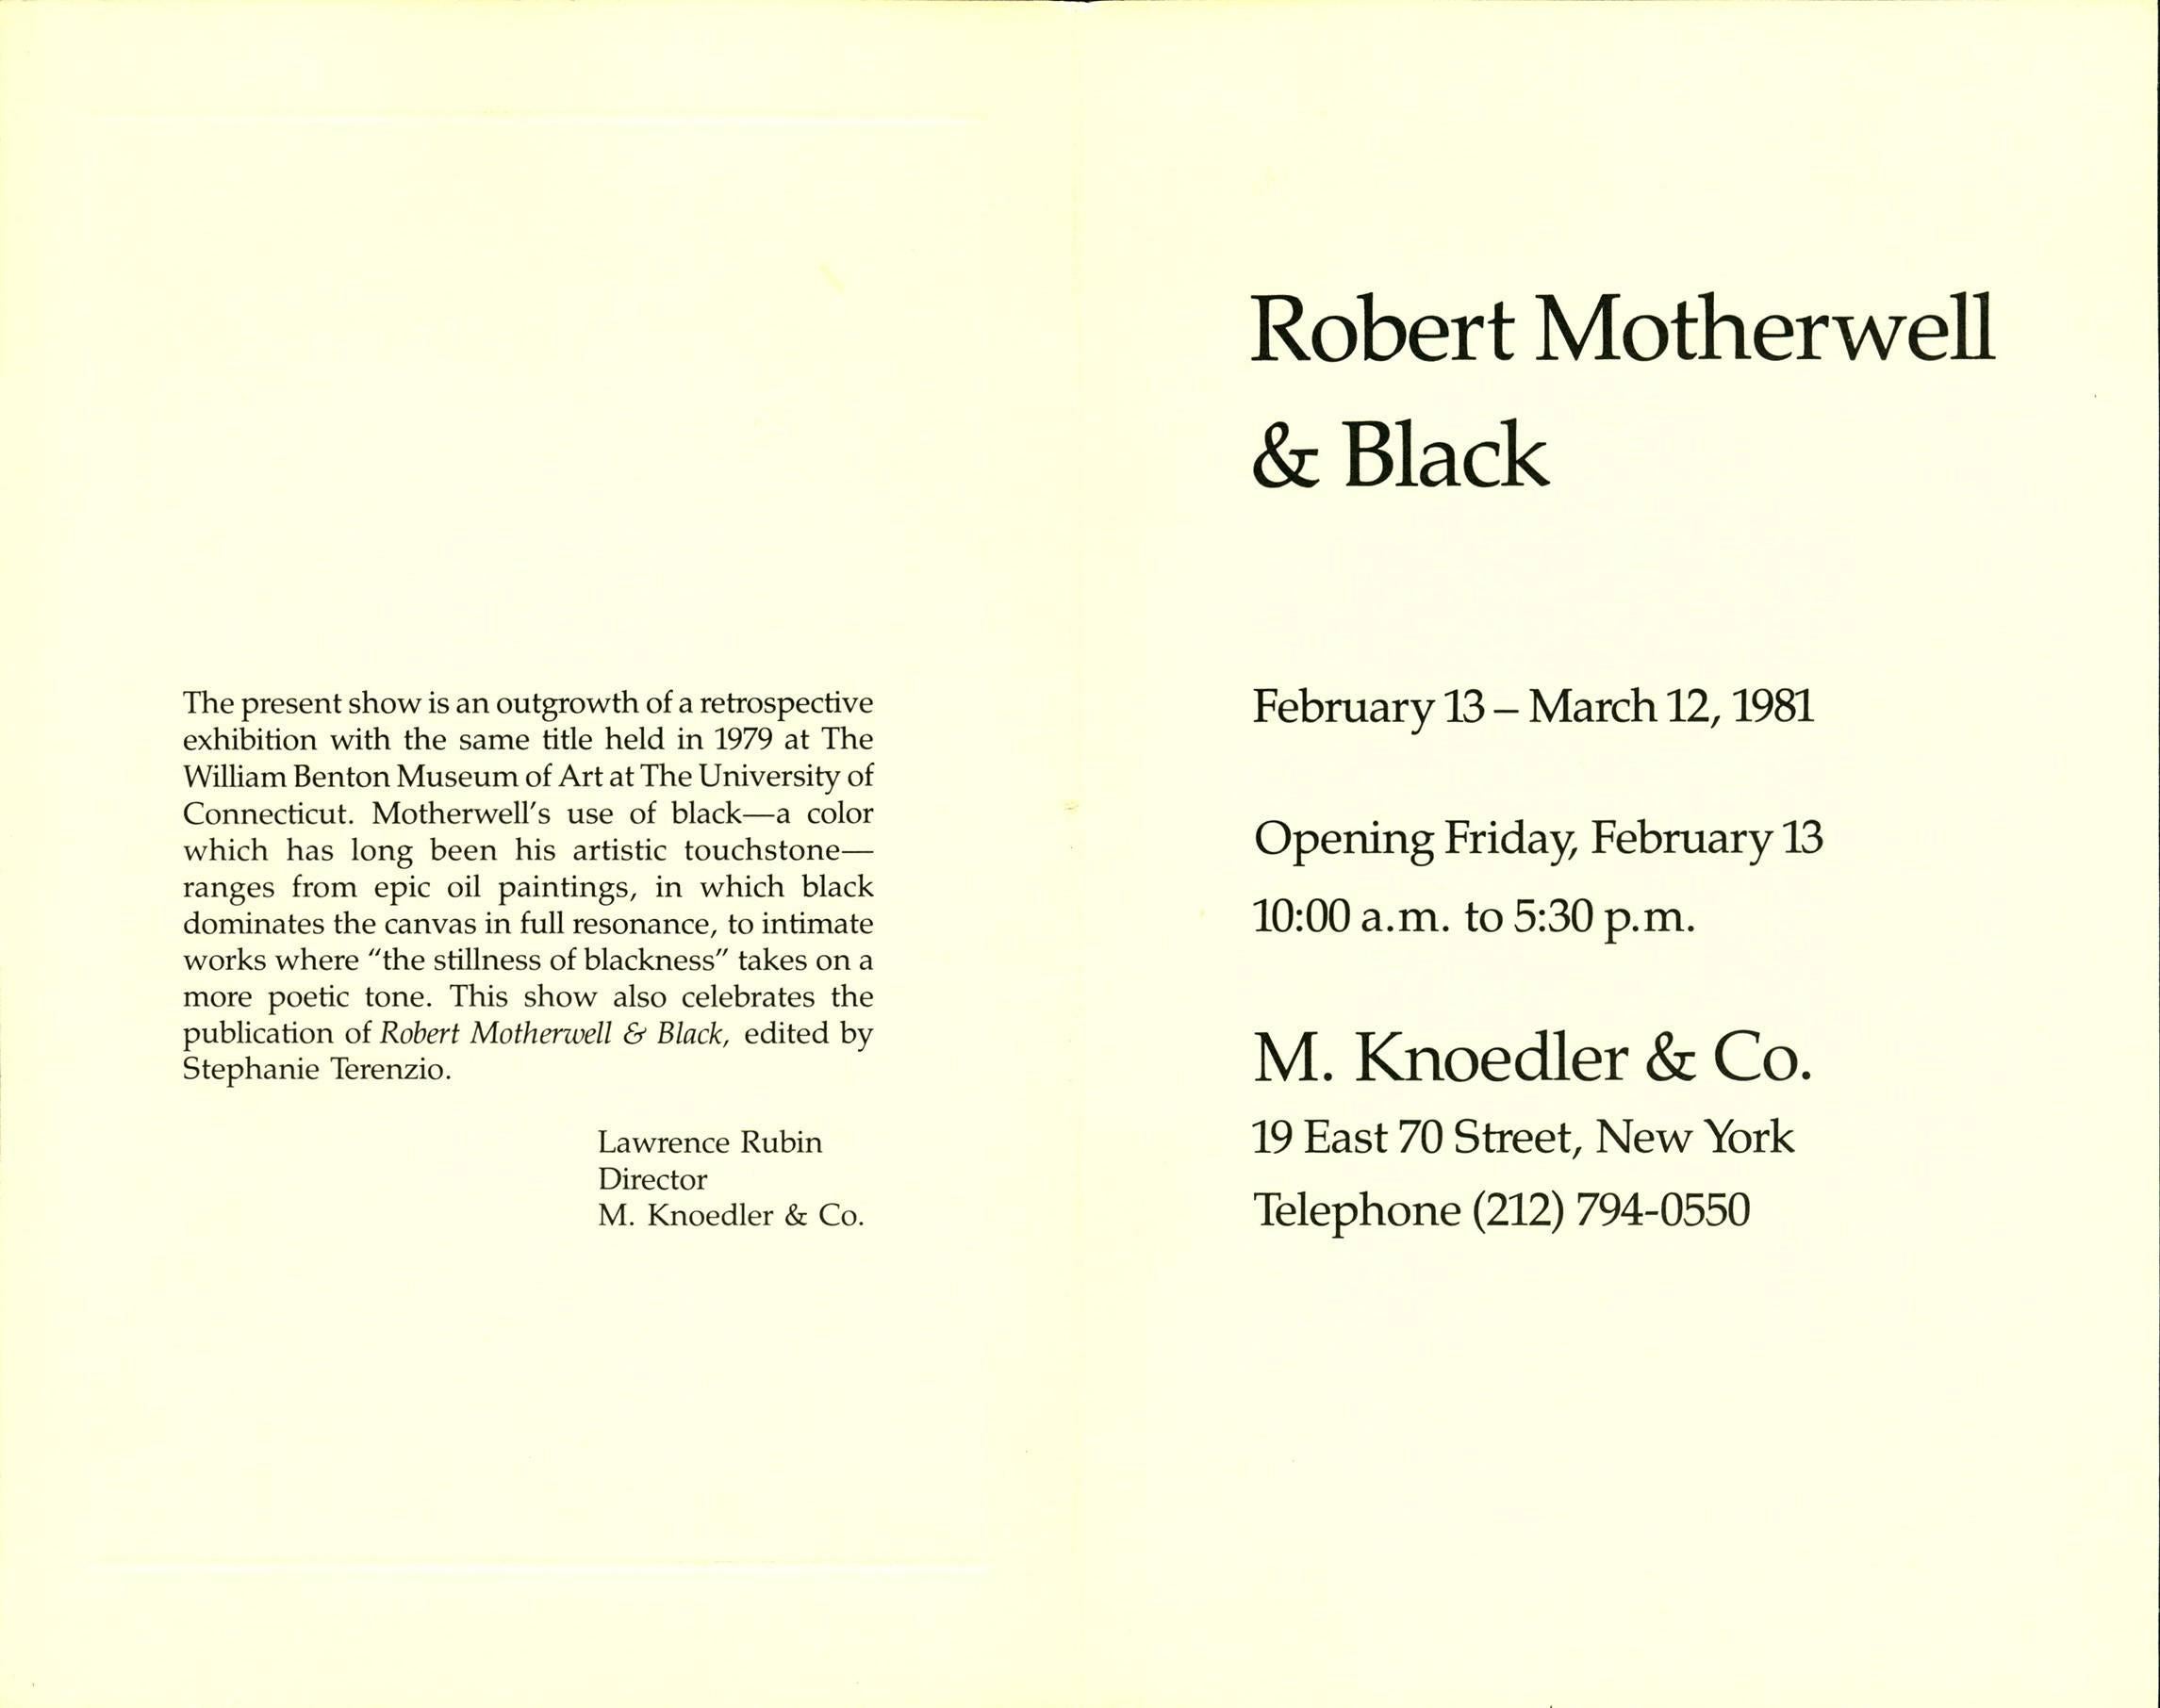 Vintage Robert Motherwell announcement card
M. Knoedler Gallery, New York, 1981
Measure: 7.5 x 9 inches
Very good condition
Suitable for framing.

About Robert Motherwell
Alongside Jackson Pollock, Mark Rothko and Willem de Kooning, Robert